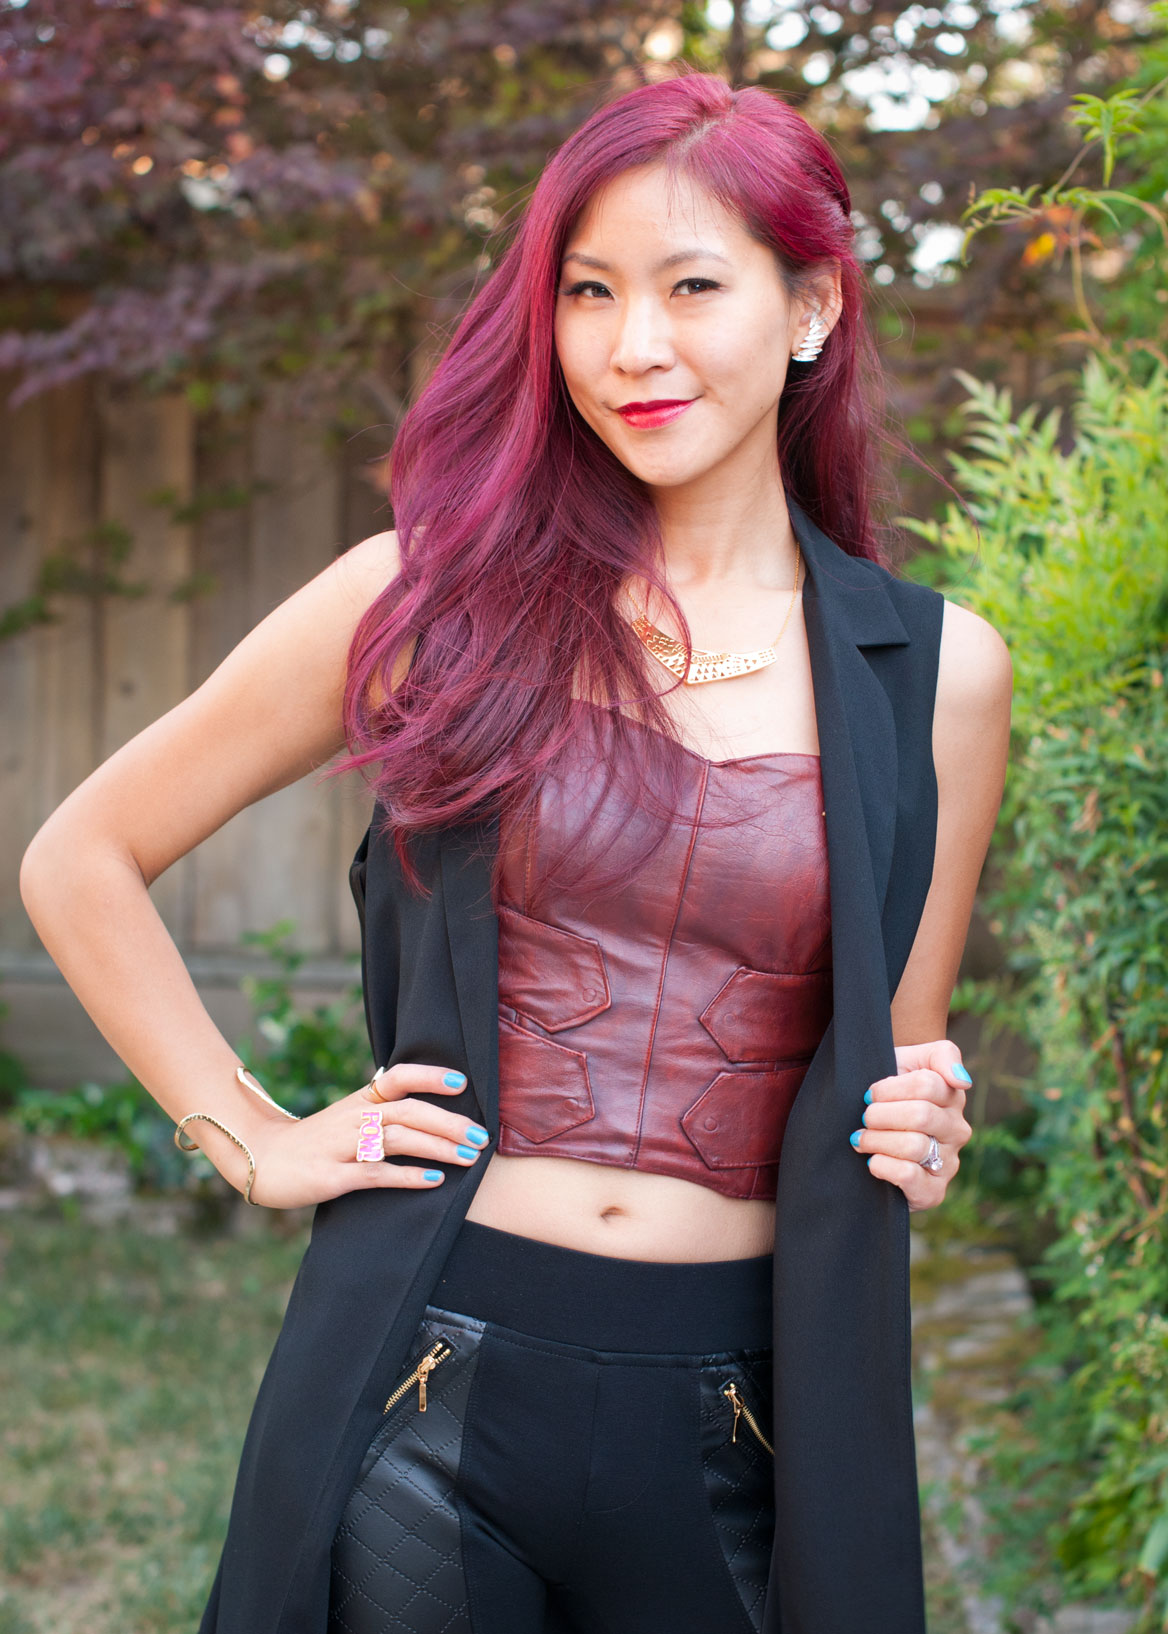 Leather Bustier and Leather Leggings